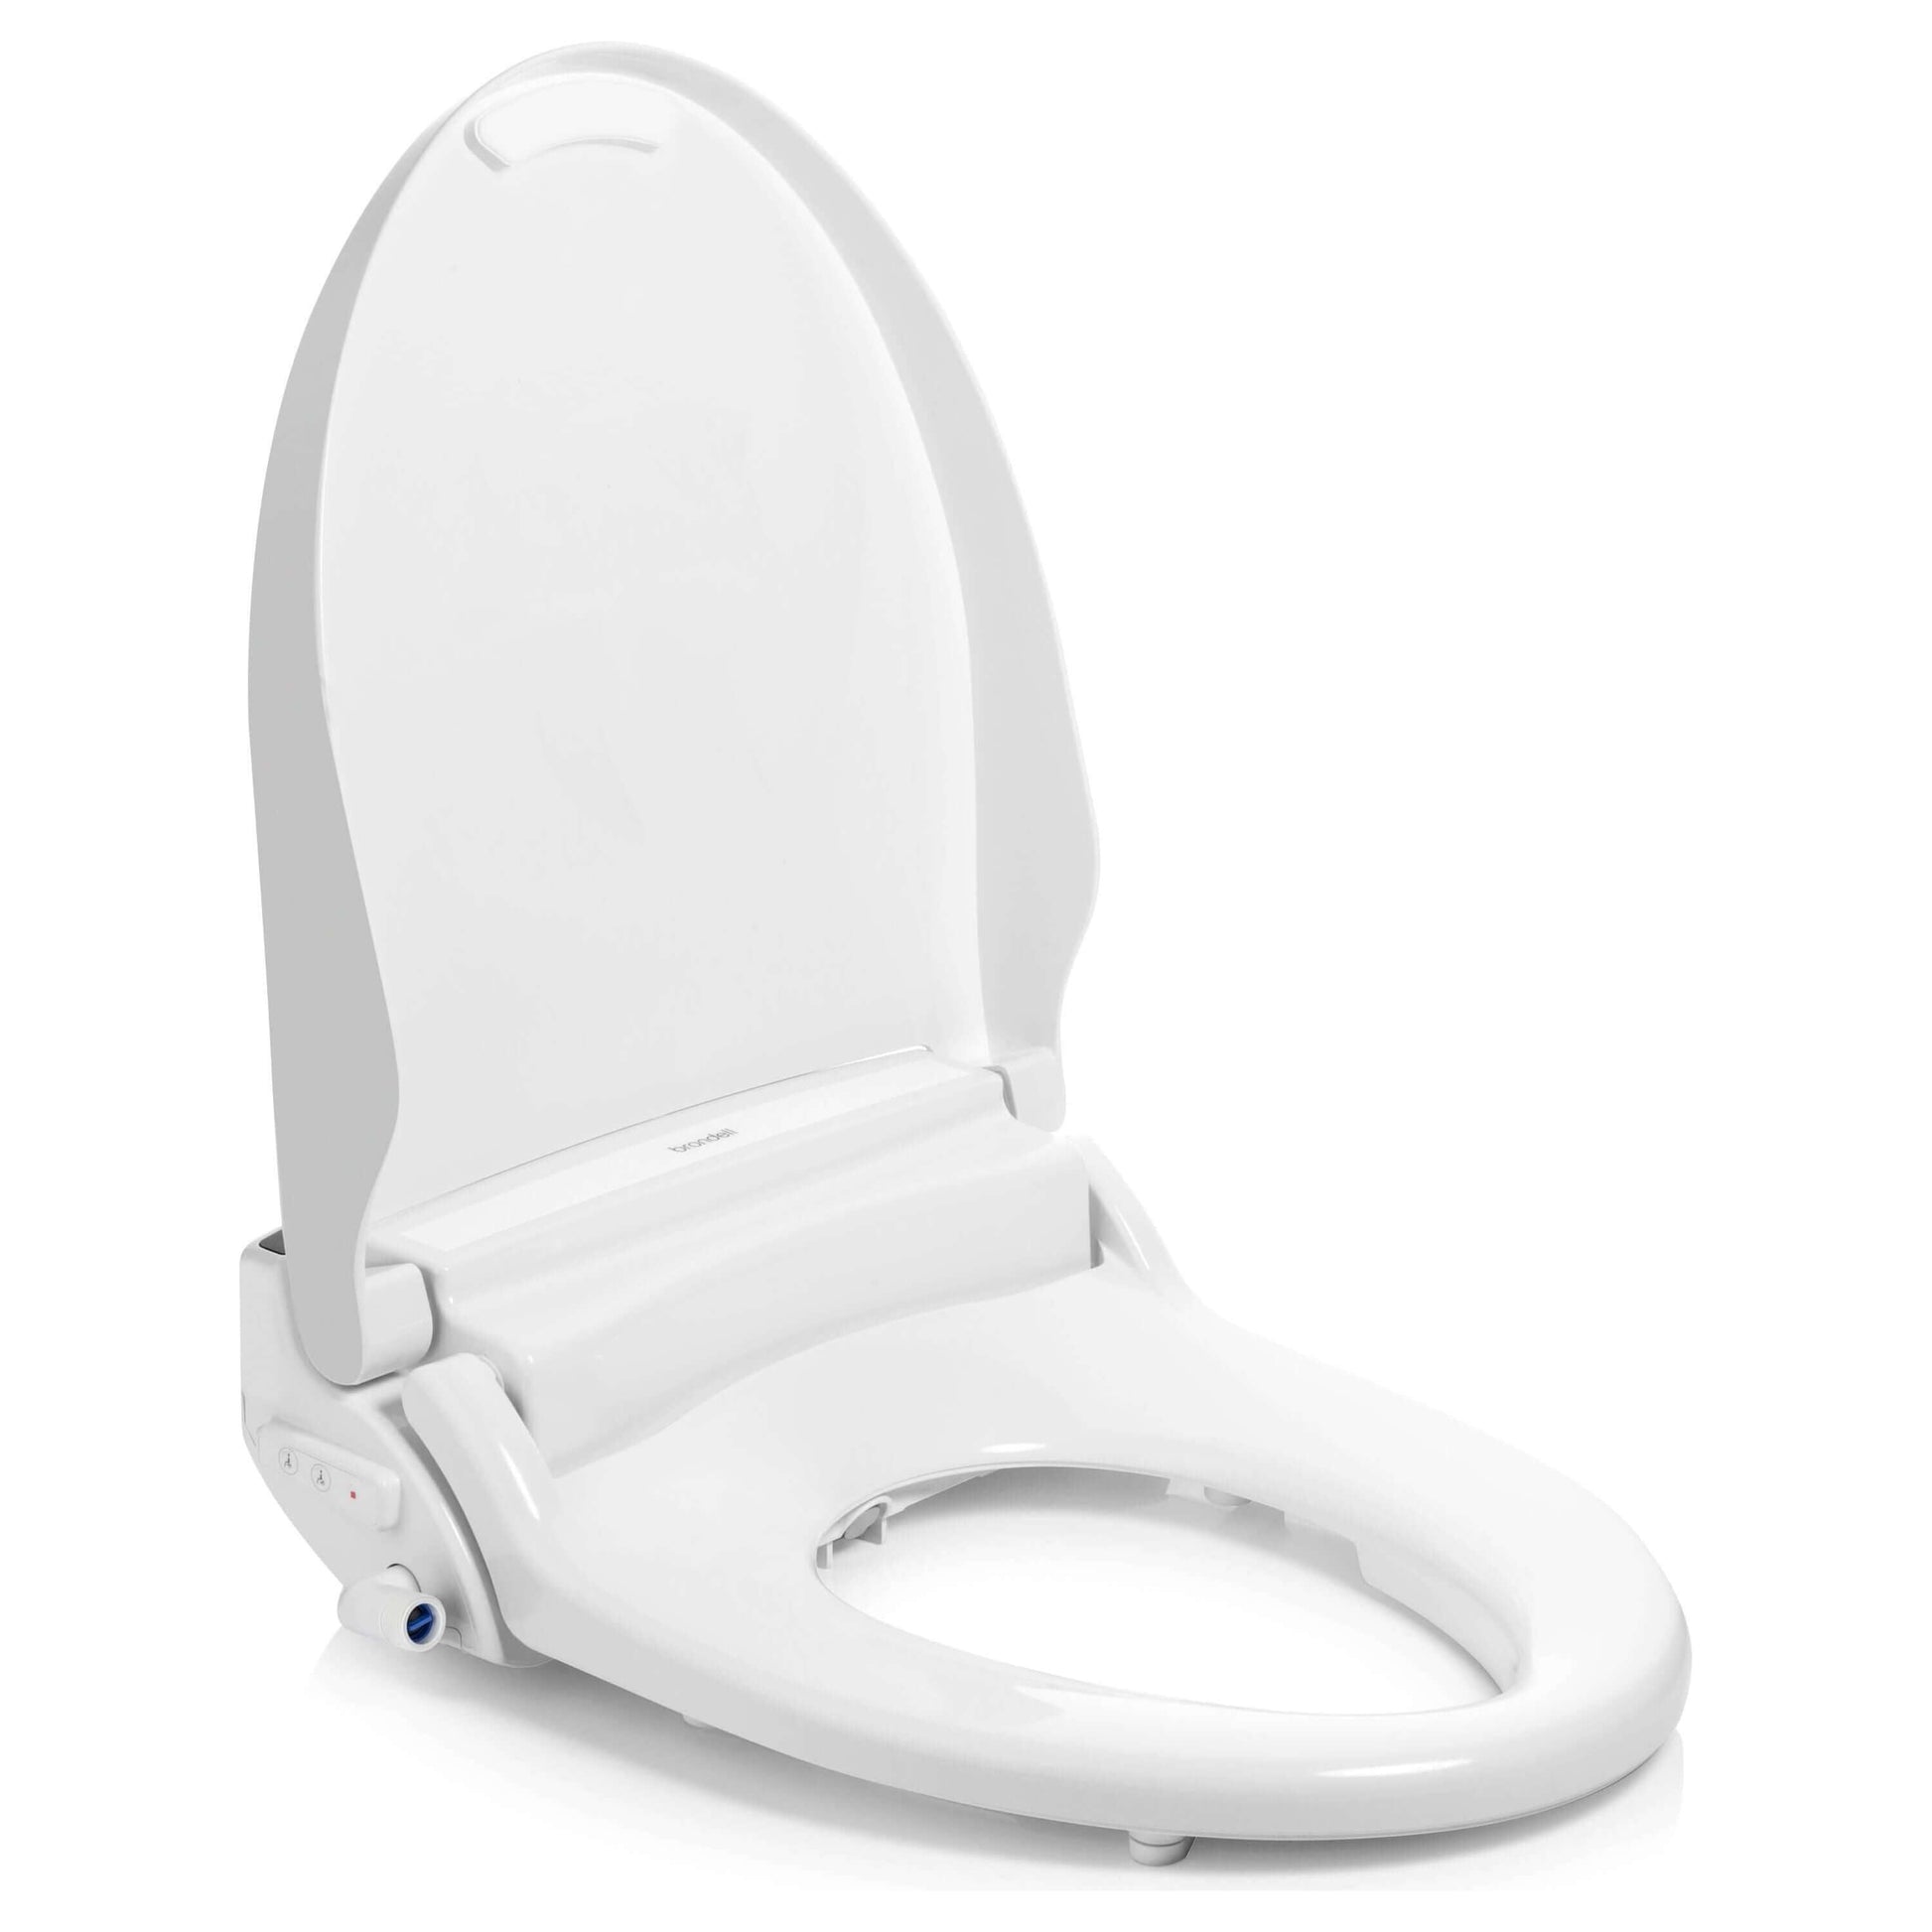 Swash Select BL97 Bidet Seat - side angled view with lid open